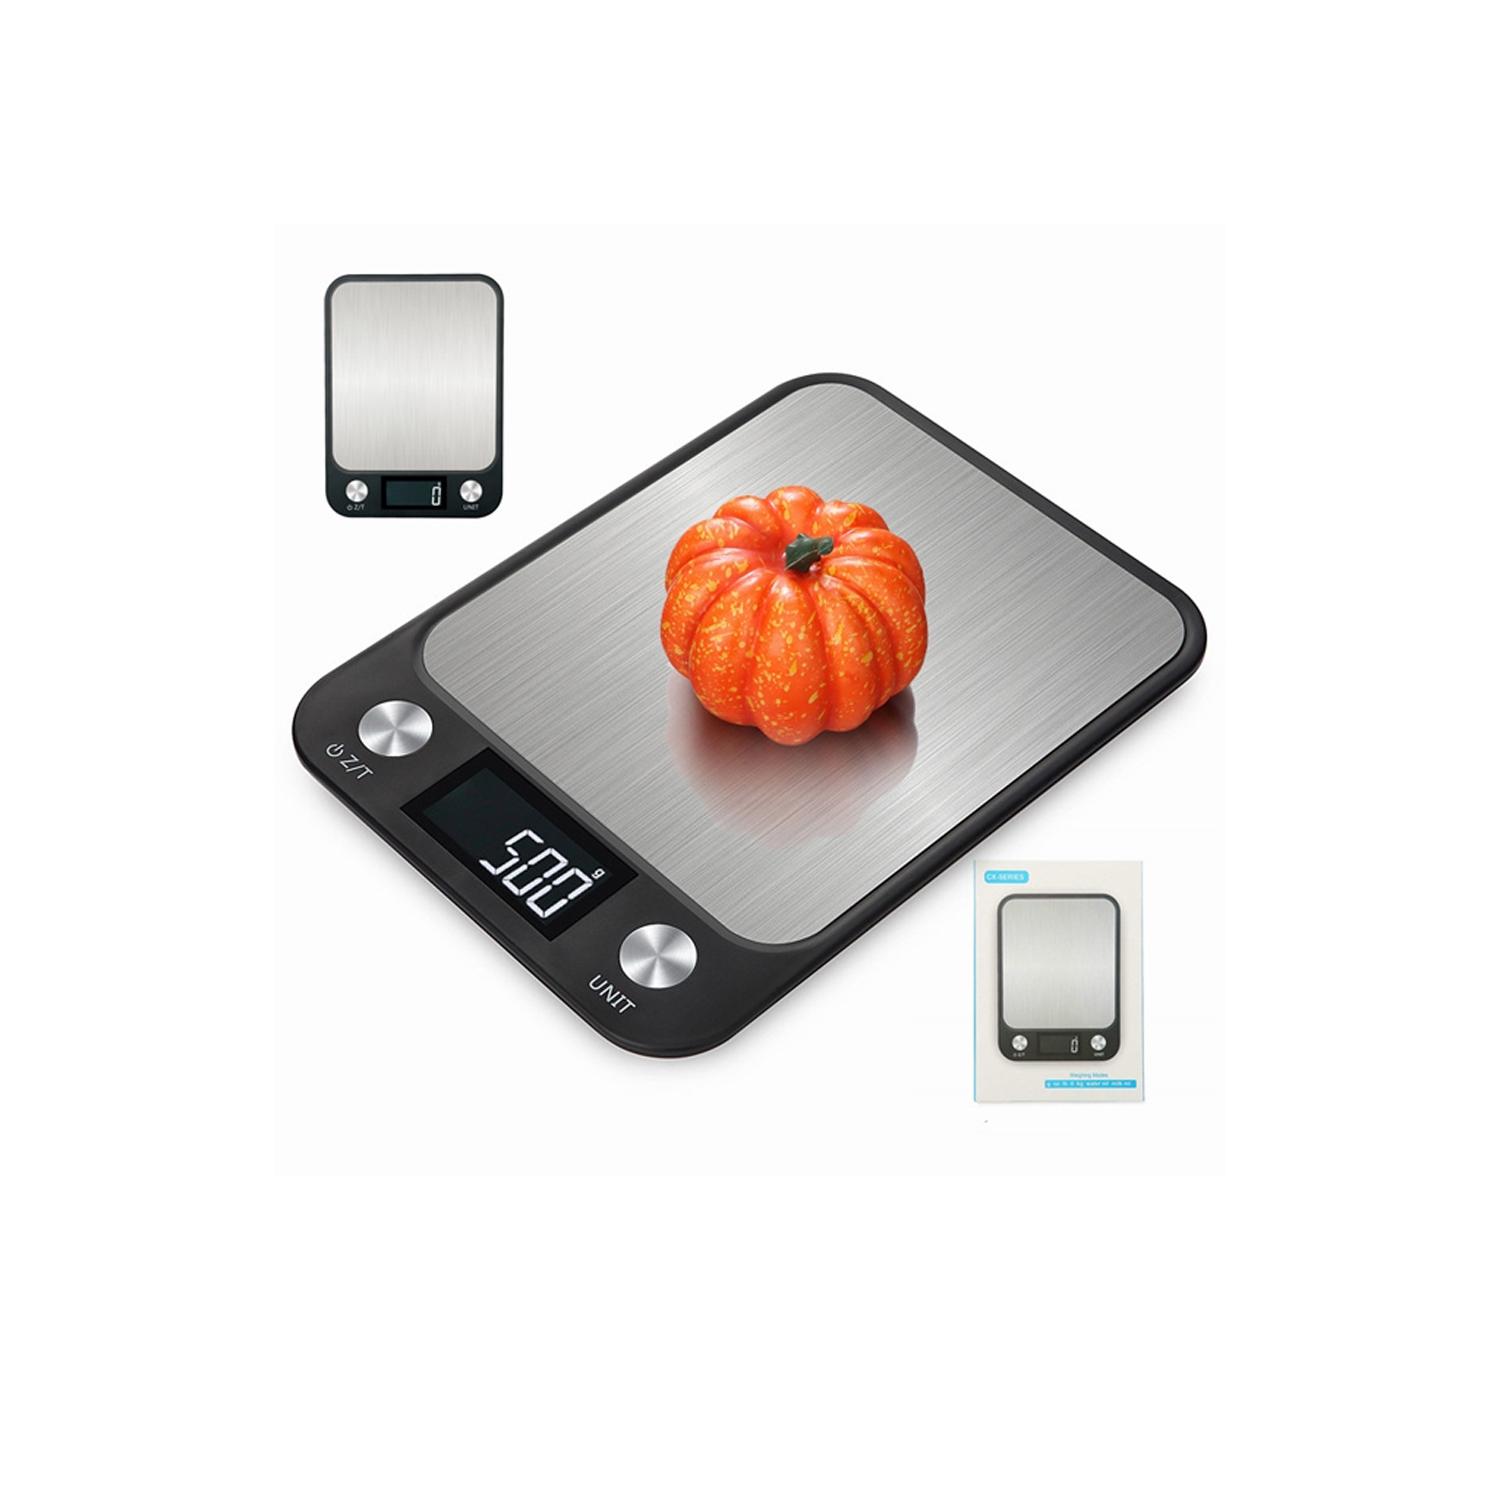 LCD 10KG WEIGHING SCALE